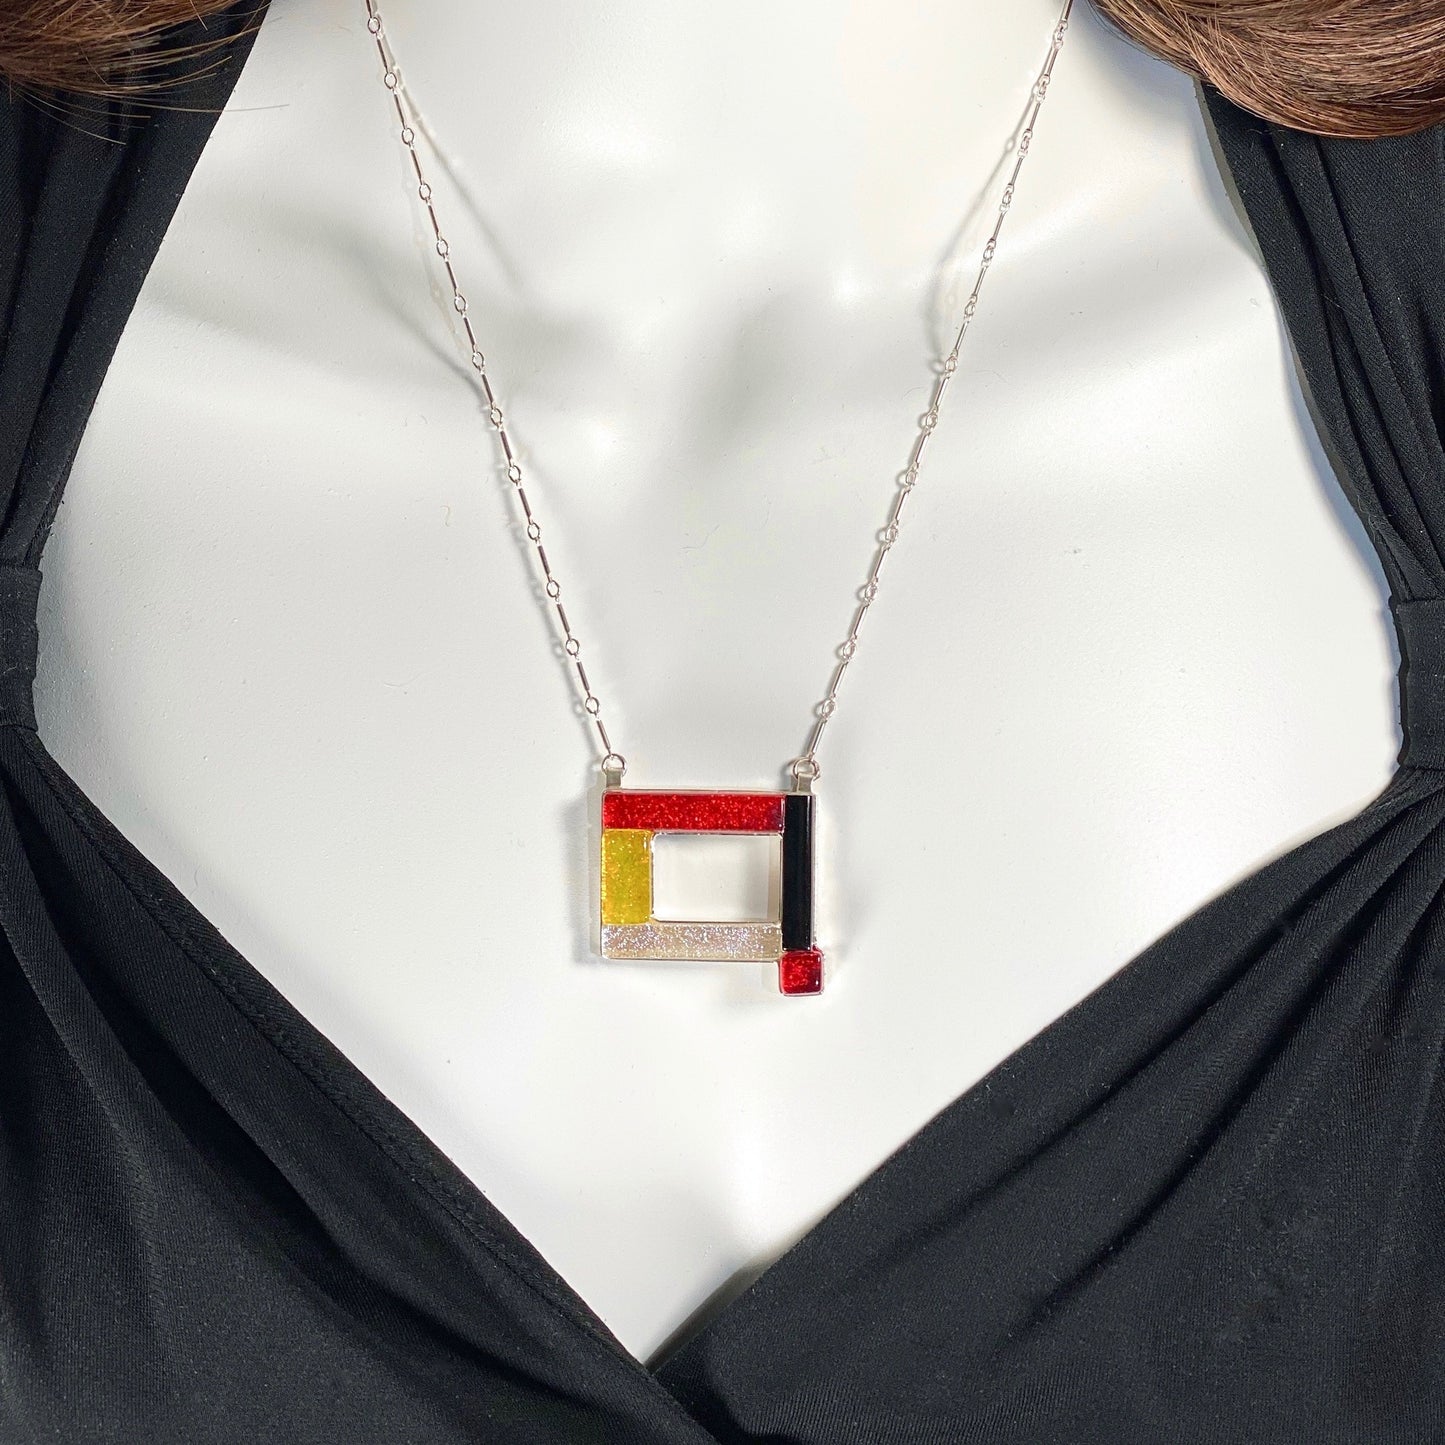 open rectangle necklace, mid century modern inspired, red, yellow, black and white, fused glass, glass jewelry, glass and silver jewelry, handmade, handcrafted, American Craft, hand fabricated jewelry, hand fabricated jewellery, Athen, Georgia, colorful jewelry, sparkle, bullseye glass, dichroic glass, art jewelry